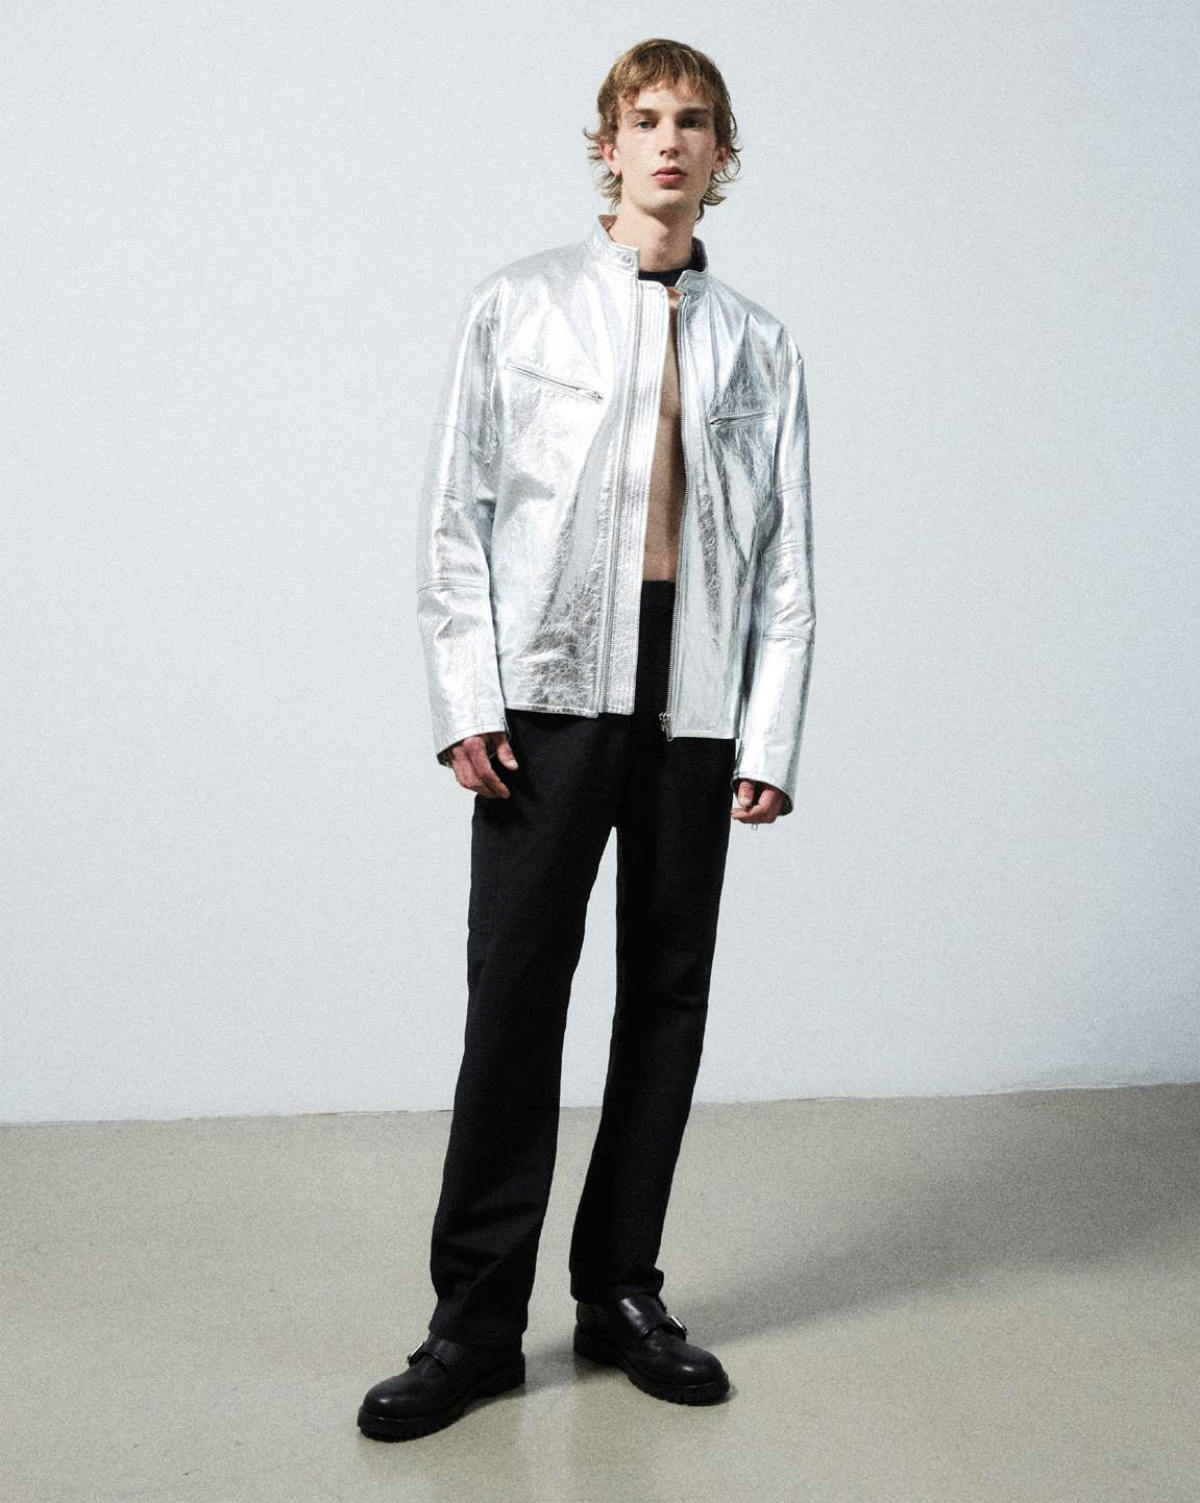 Helmut Lang Presents Its New Pre-Fall 2022 Menswear Collection